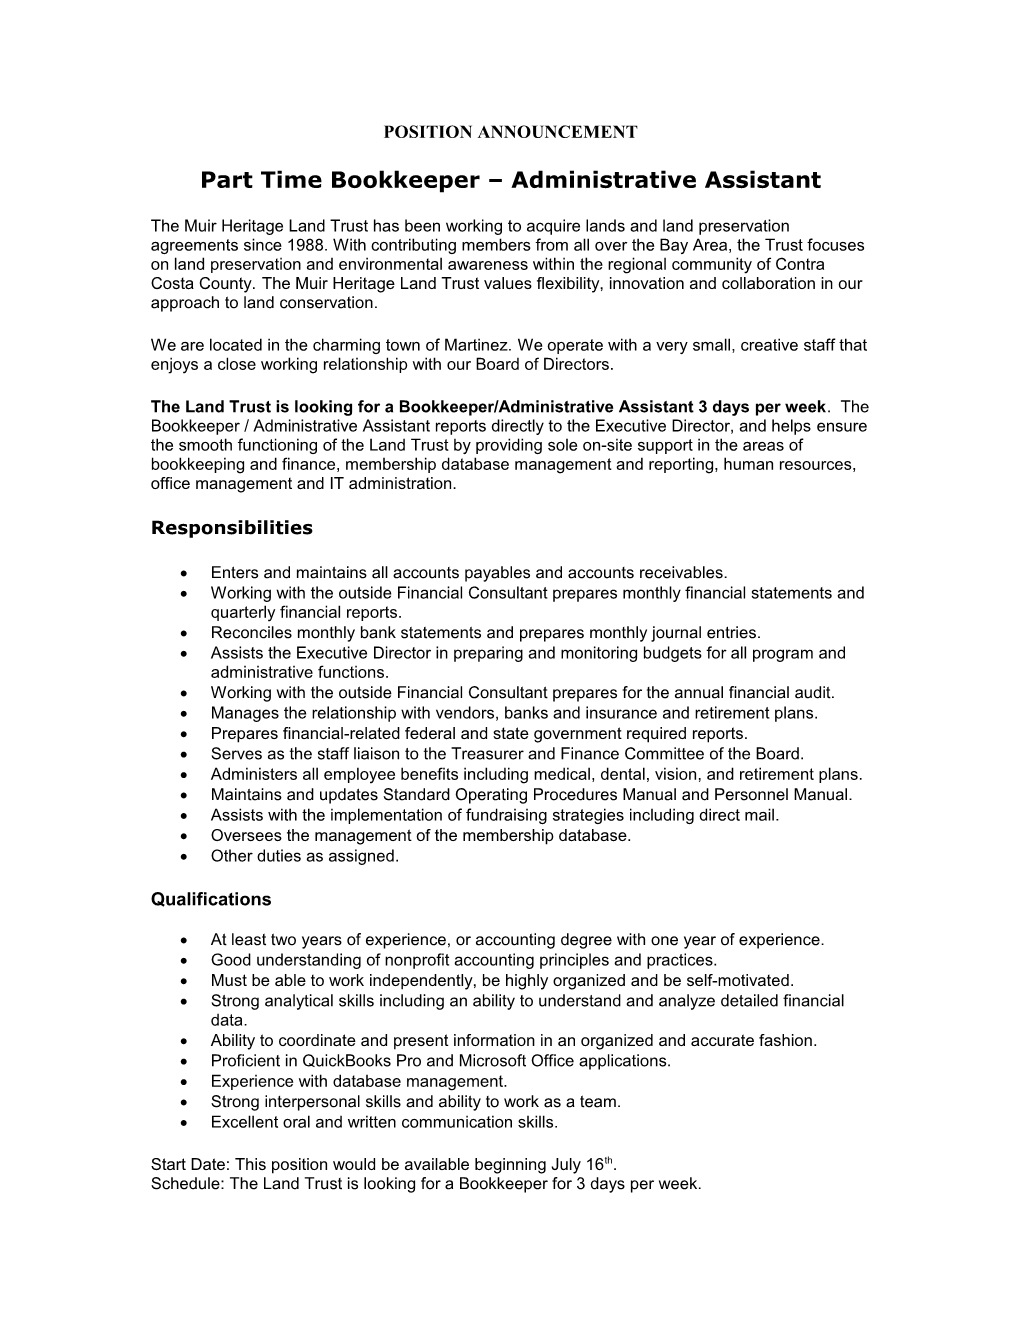 Part Time Bookkeeper Administrative Assistant